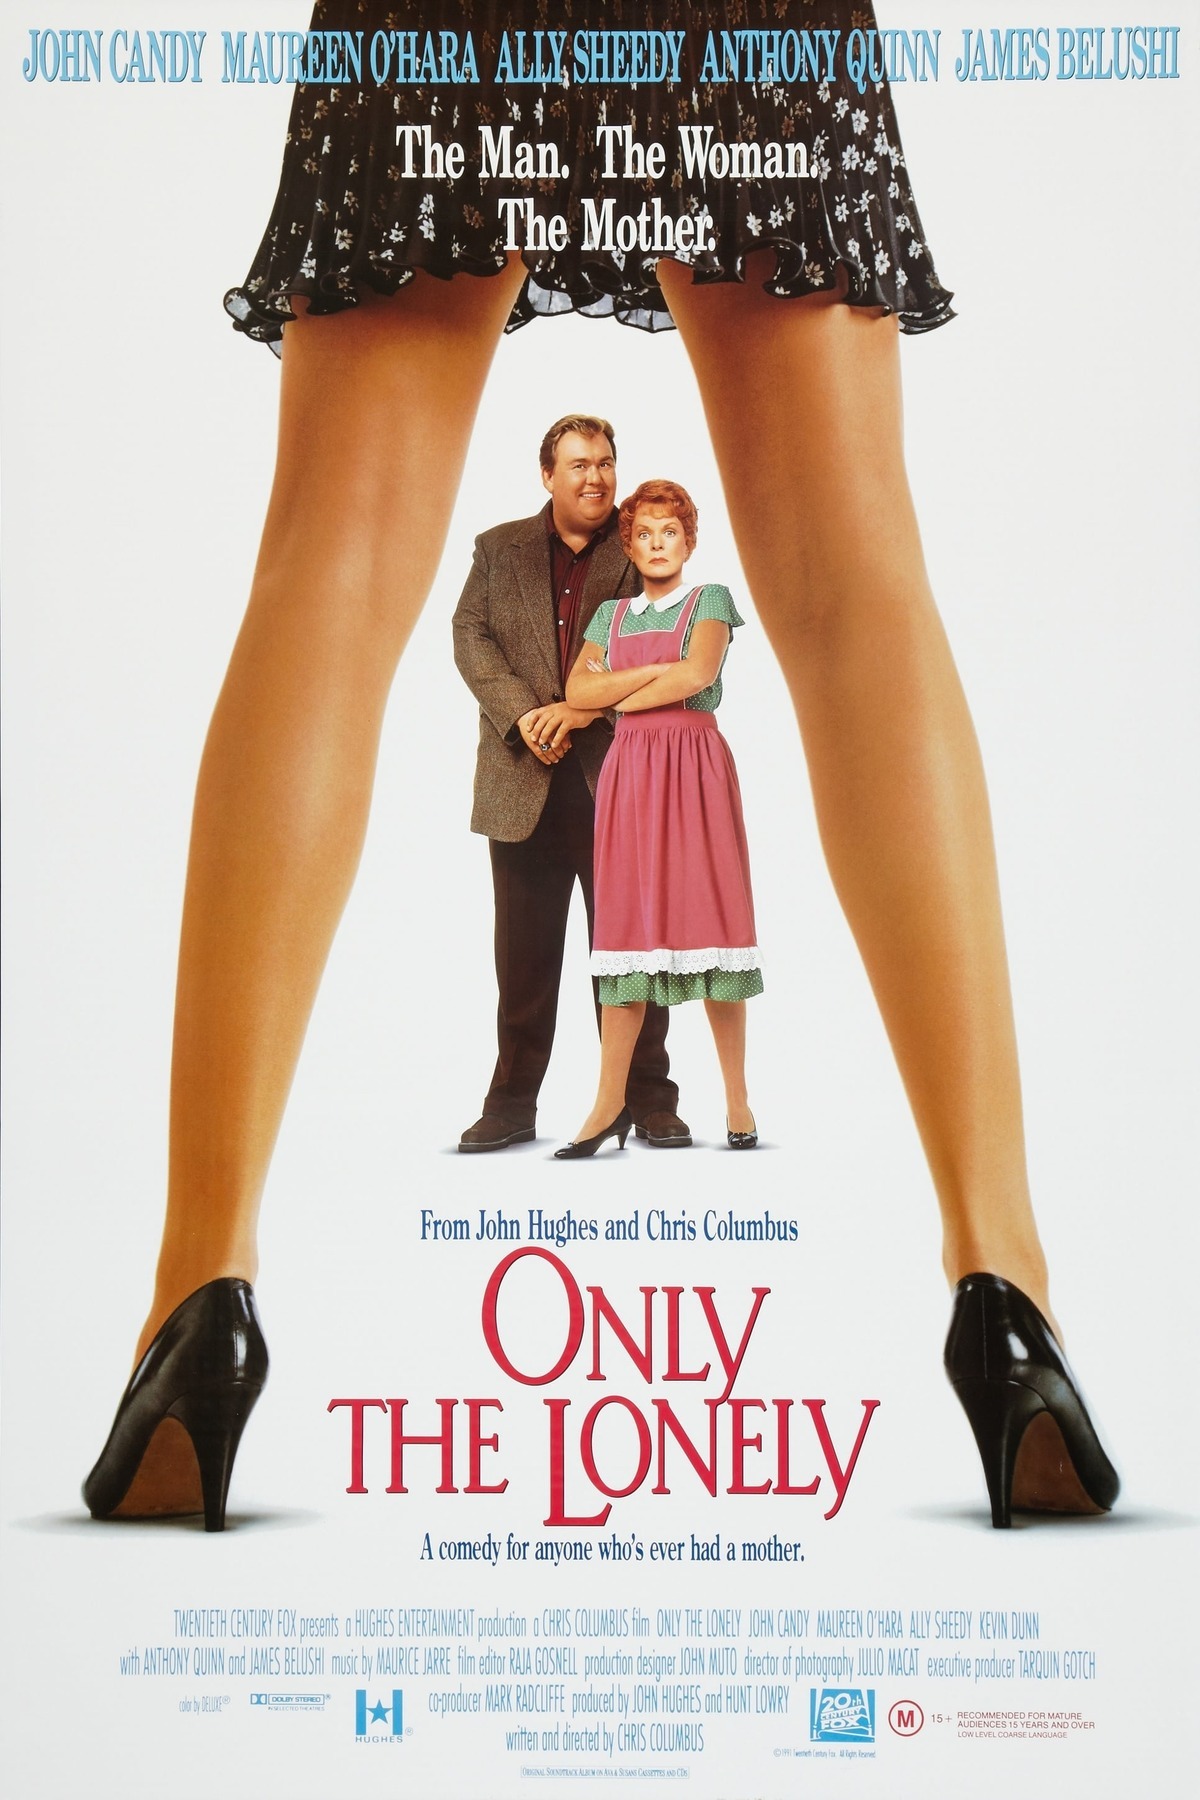 Cover of the film "Only the lonely will understand"